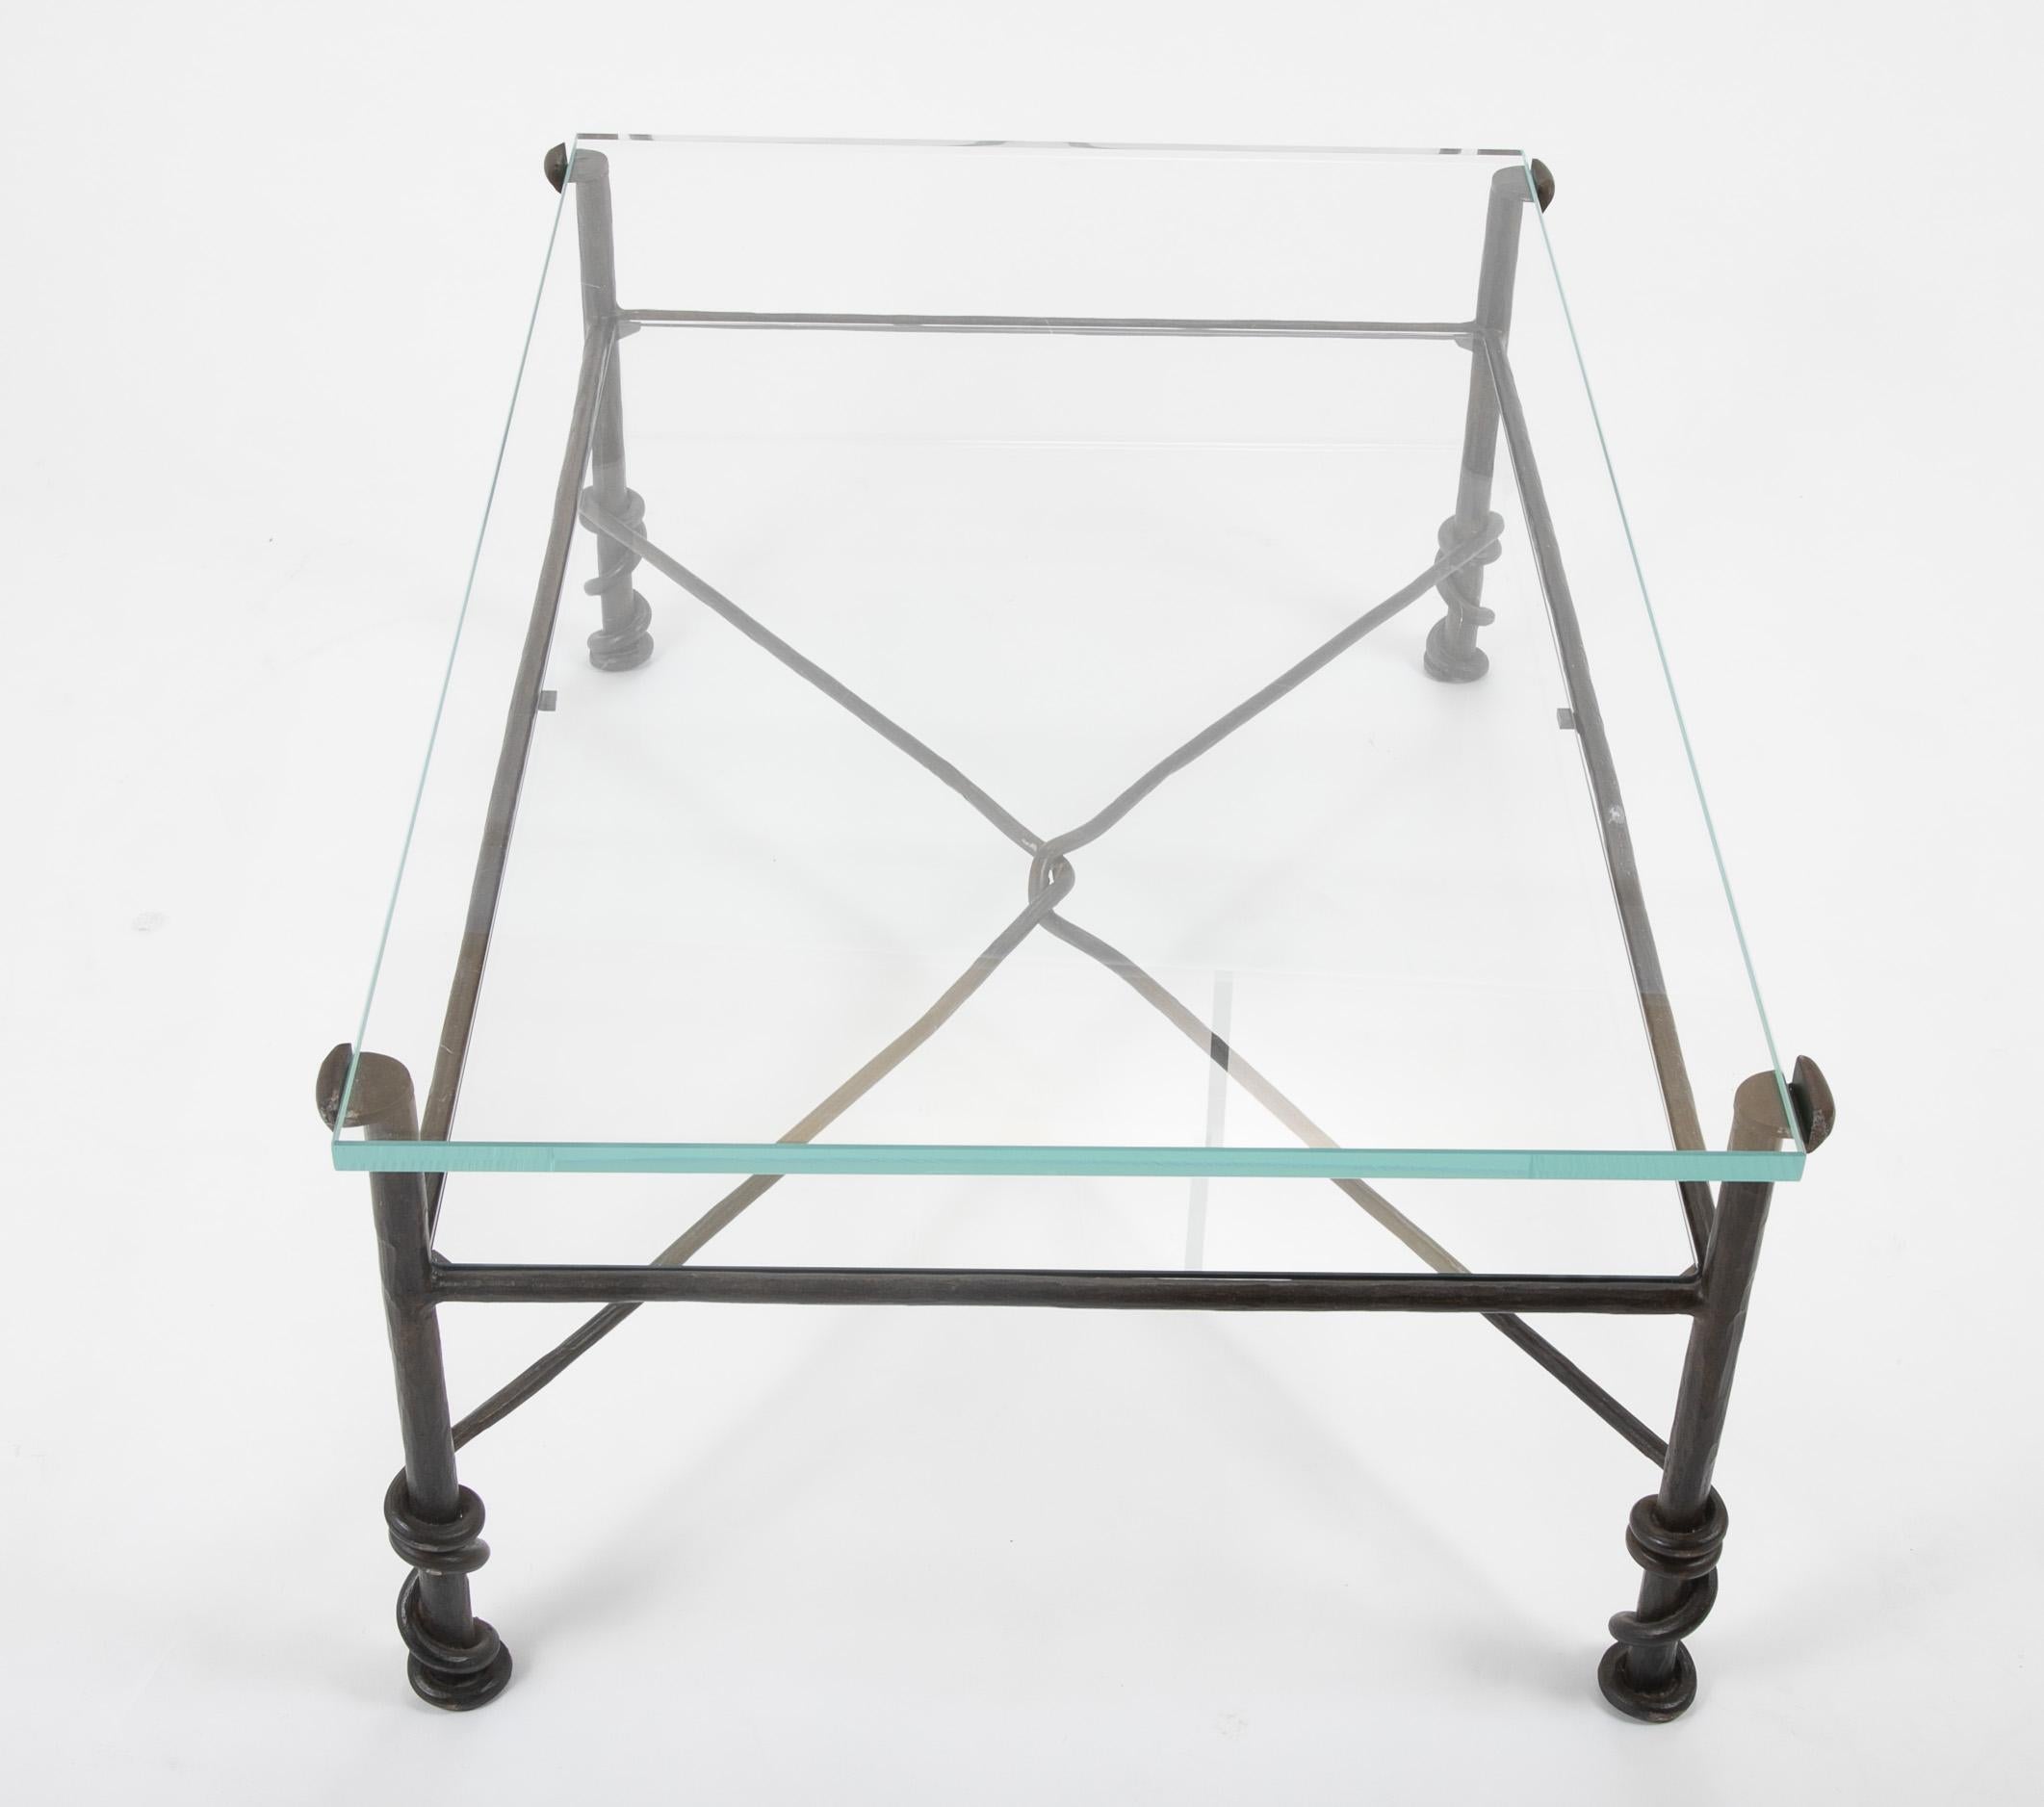 Wrought iron low table with two tiered glass top. The thick top piece resting in iron supports, the thinner second tier acts as a shelf underneath, a great place for books. With unusual rope-form iron stretchers that intertwine and wraparound the